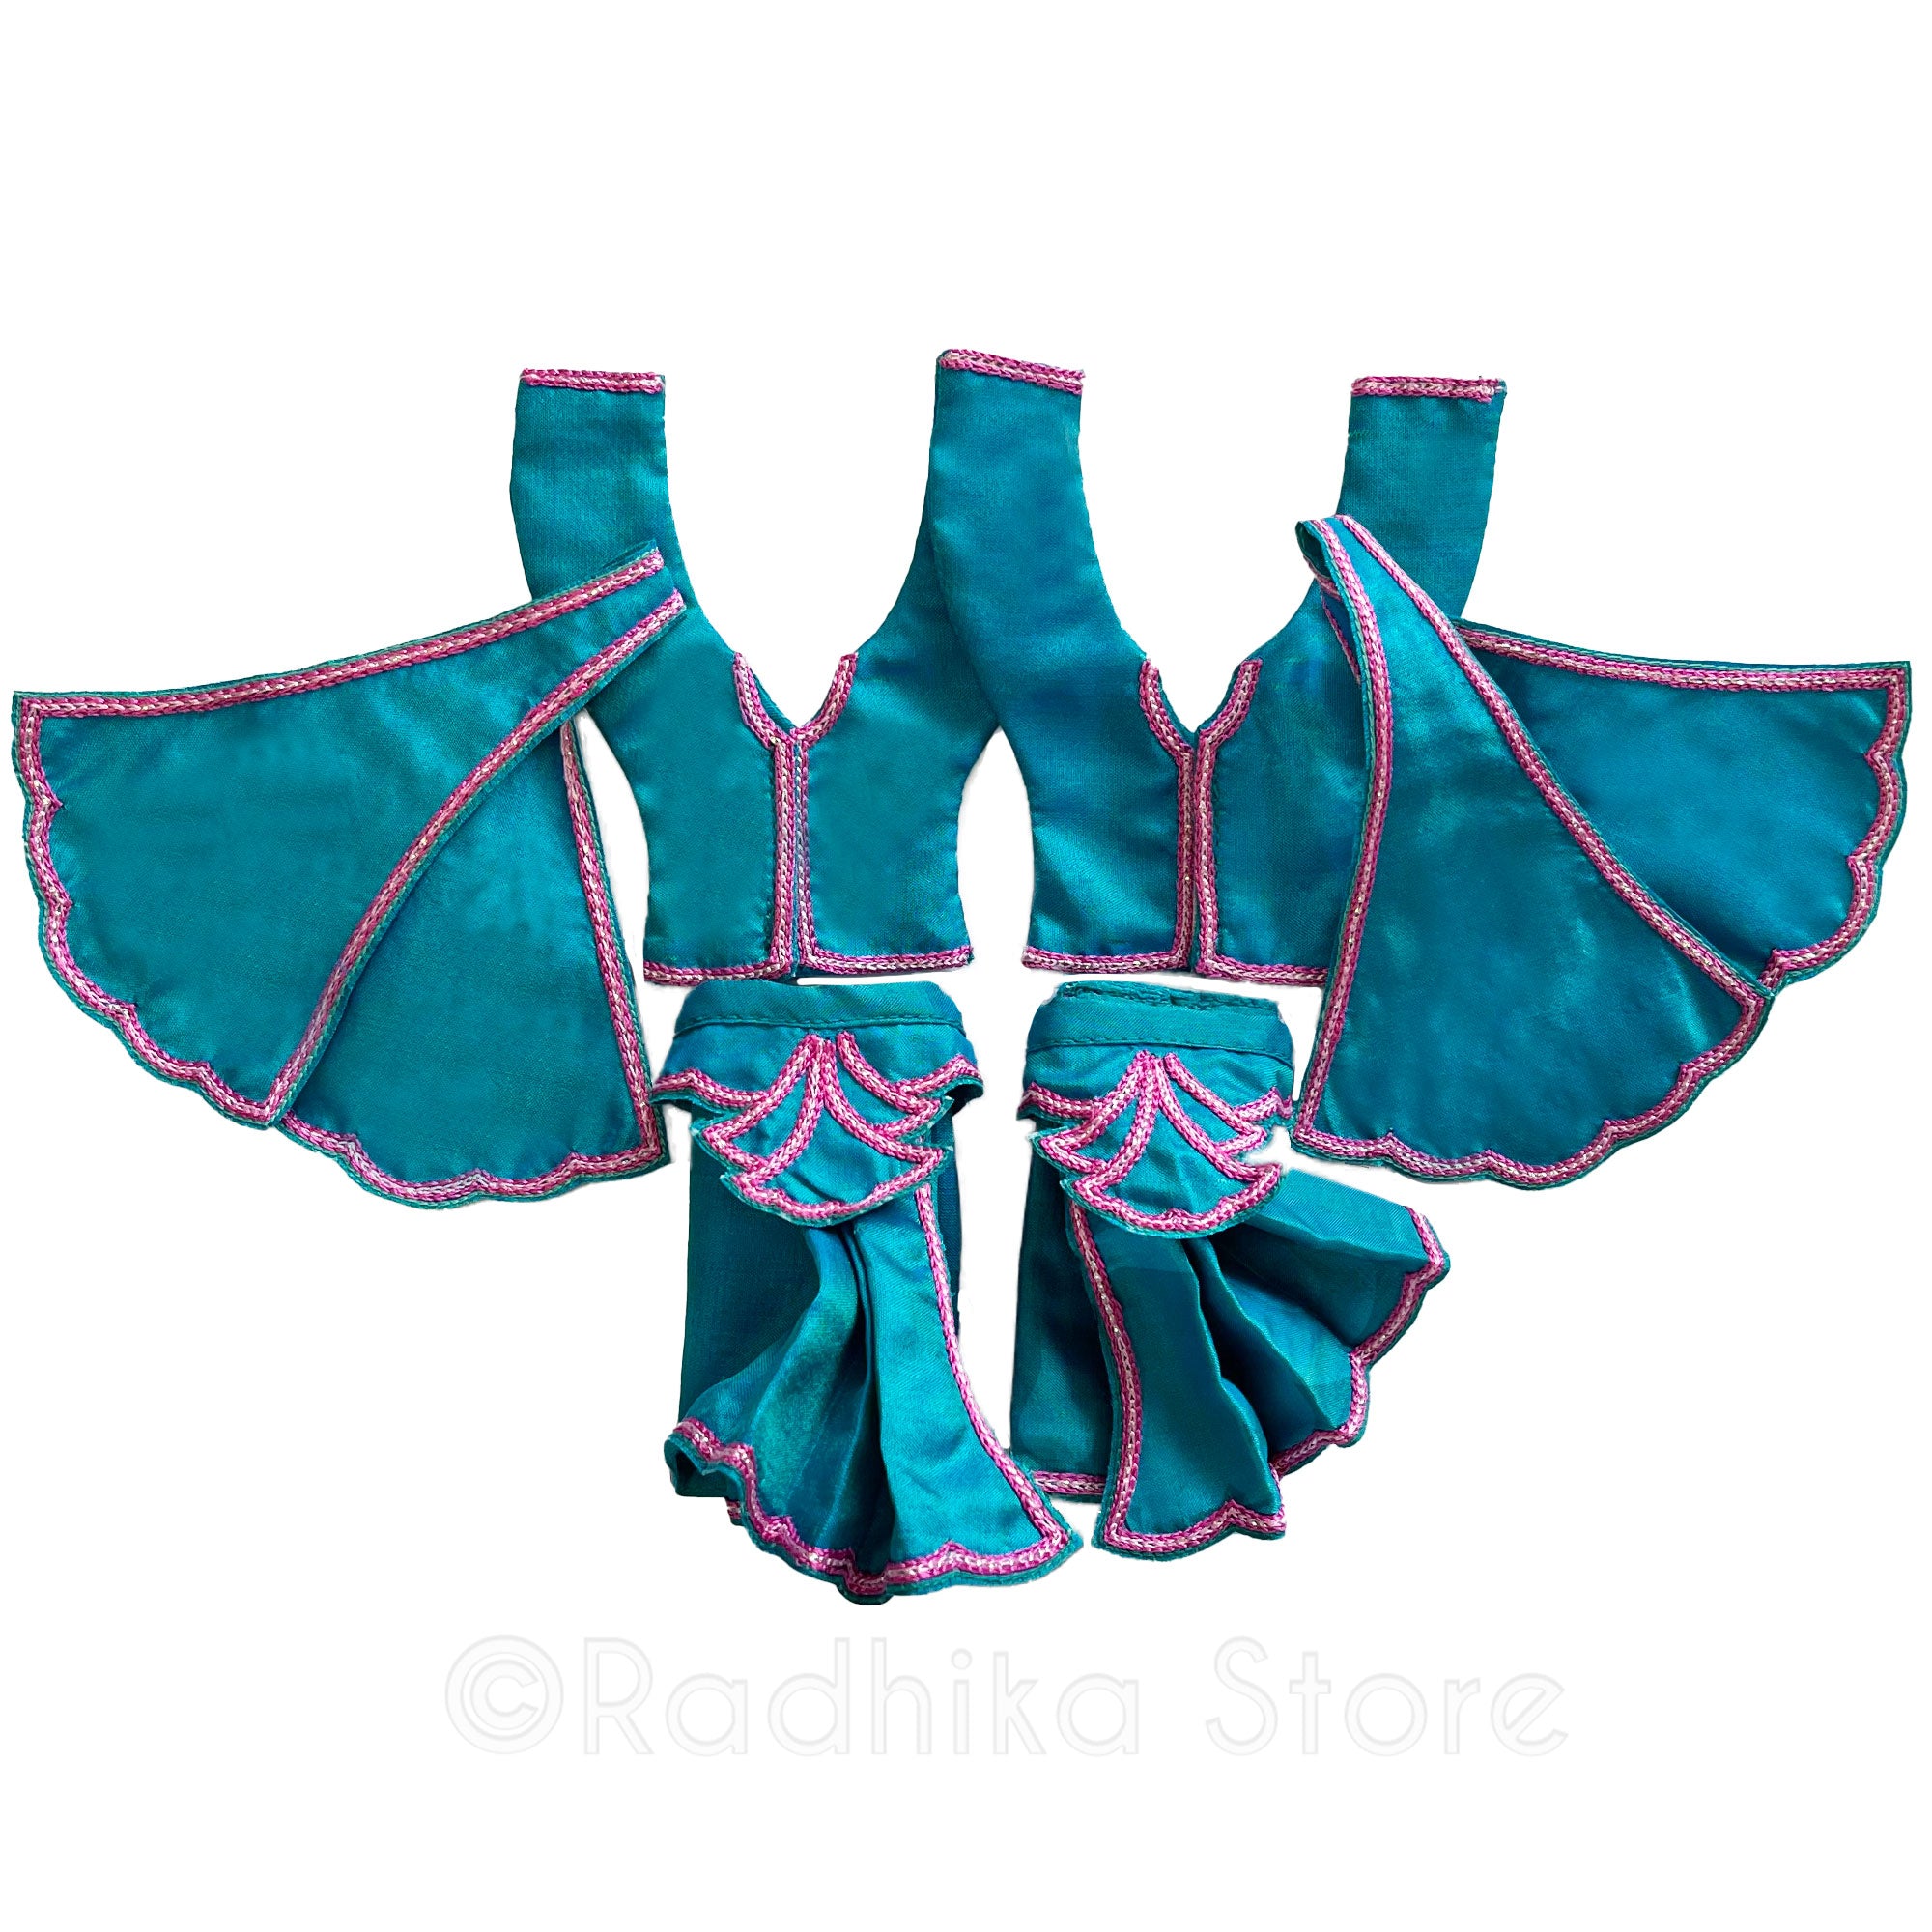 Oceans Of Mercy- Silk -  Deep Teal Blue and Pink - Gaura Nitai Deity Outfit